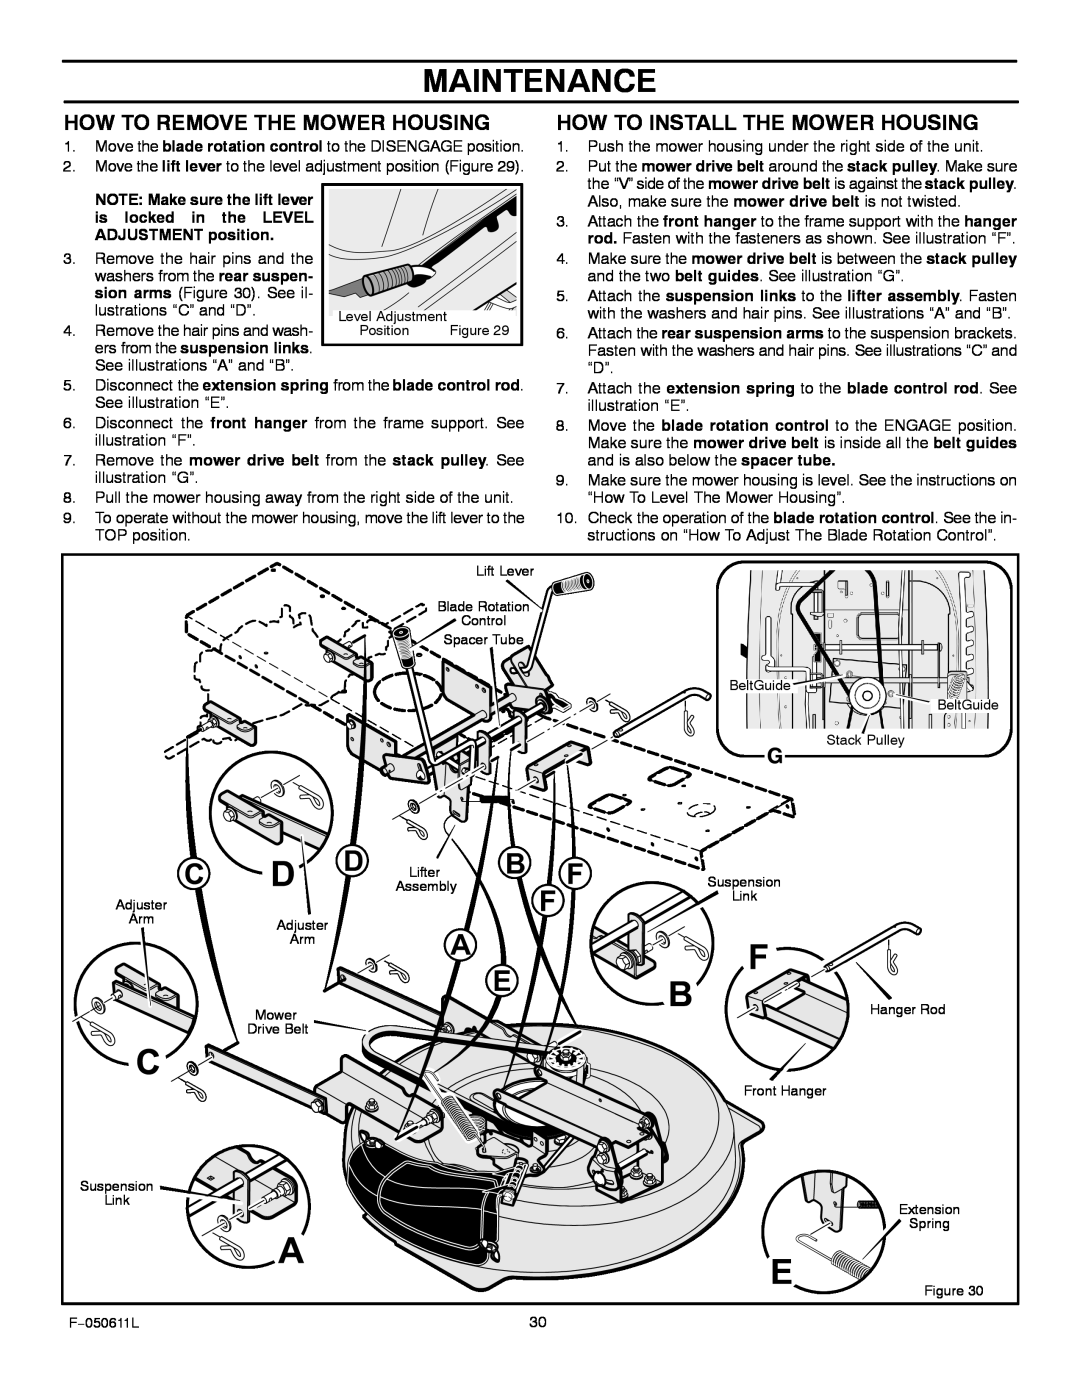 Murray 309007x8B manual How To Remove The Mower Housing, How To Install The Mower Housing, Maintenance 